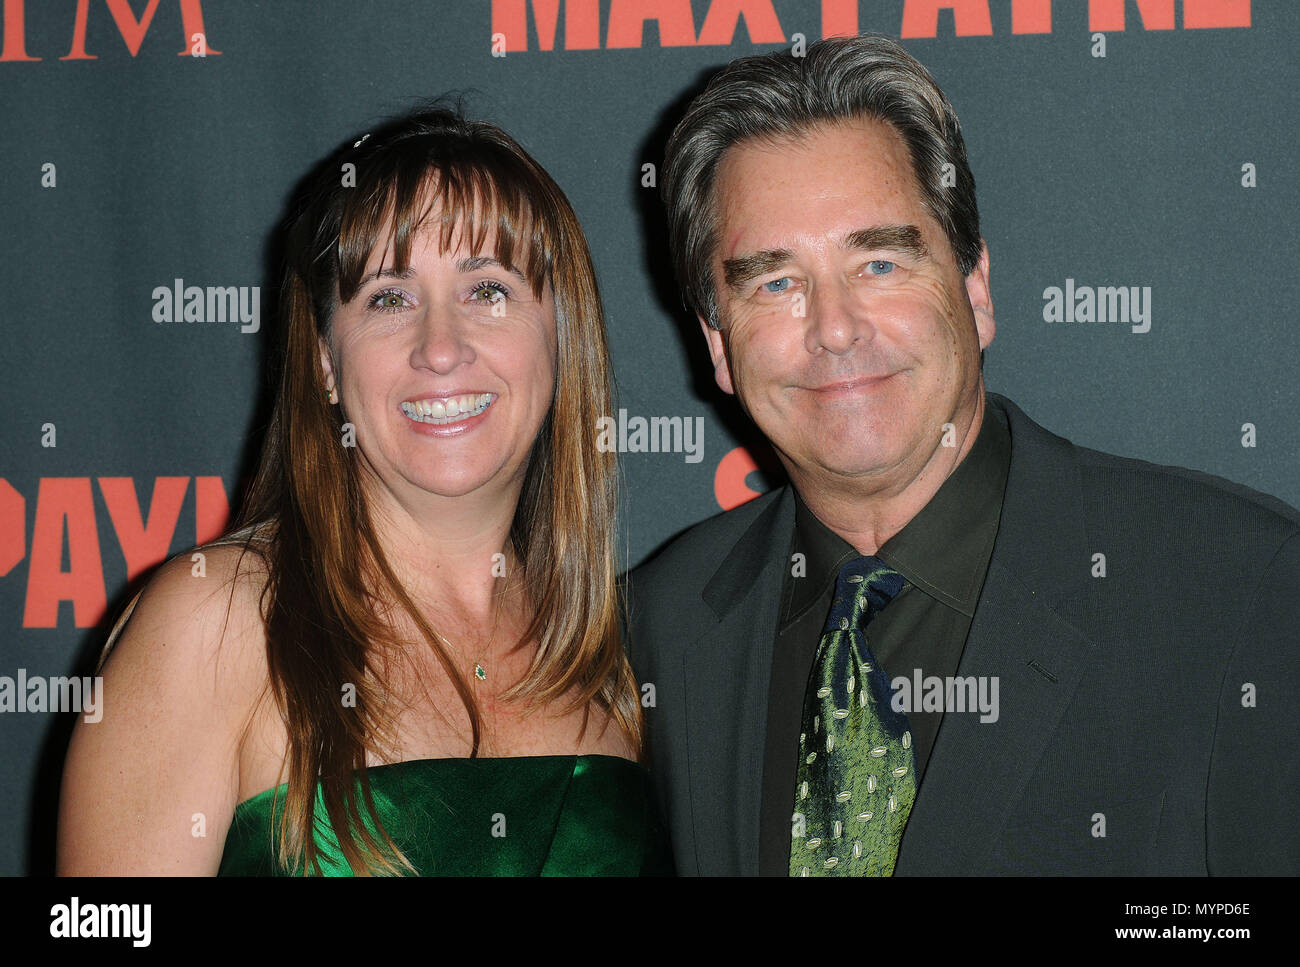 Beau Bridges and wife Wendy - Max Payne Maxim after party at The Stork Club in Los Angeles.03 BridgesBeau Wendy 03  Event in Hollywood Life - California, Red Carpet Event, USA, Film Industry, Celebrities, Photography, Bestof, Arts Culture and Entertainment, Celebrities fashion, Best of, Hollywood Life, Event in Hollywood Life - California, Red Carpet and backstage, Music celebrities, Topix, Couple, family ( husband and wife ) and kids- Children, brothers and sisters inquiry tsuni@Gamma-USA.com, Credit Tsuni / USA, 2006 to 2009 Stock Photo